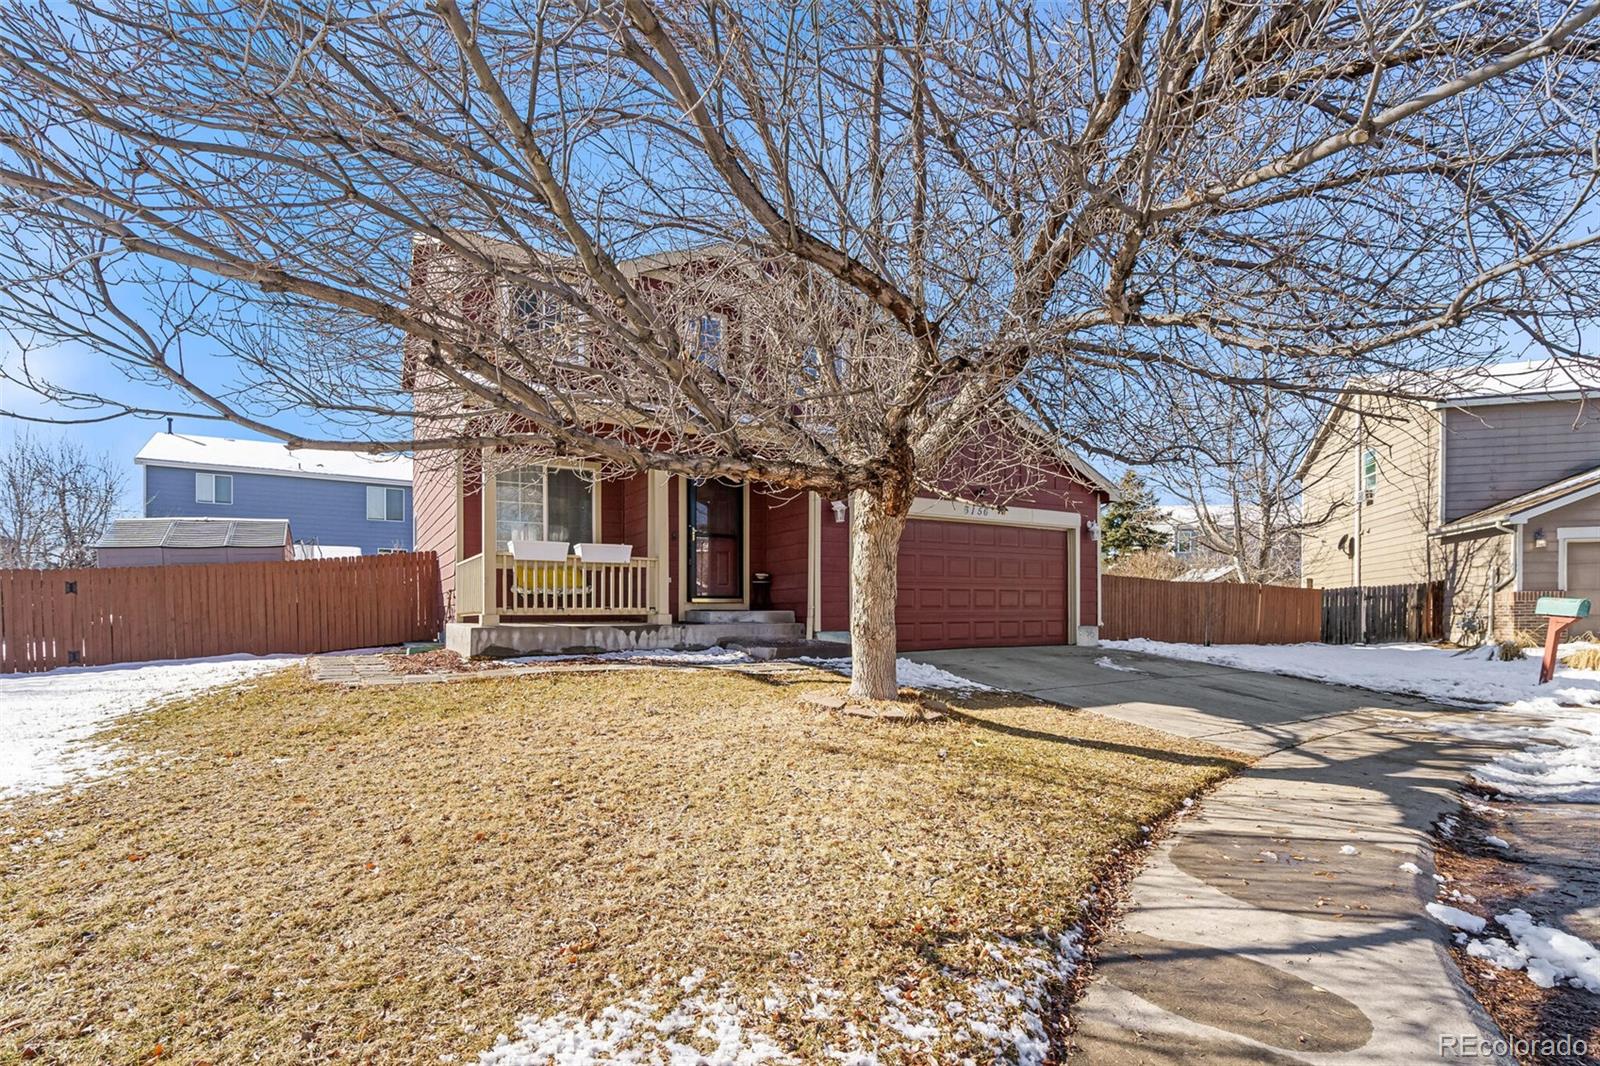 3156 e 107th court, Northglenn sold home. Closed on 2024-03-12 for $535,000.